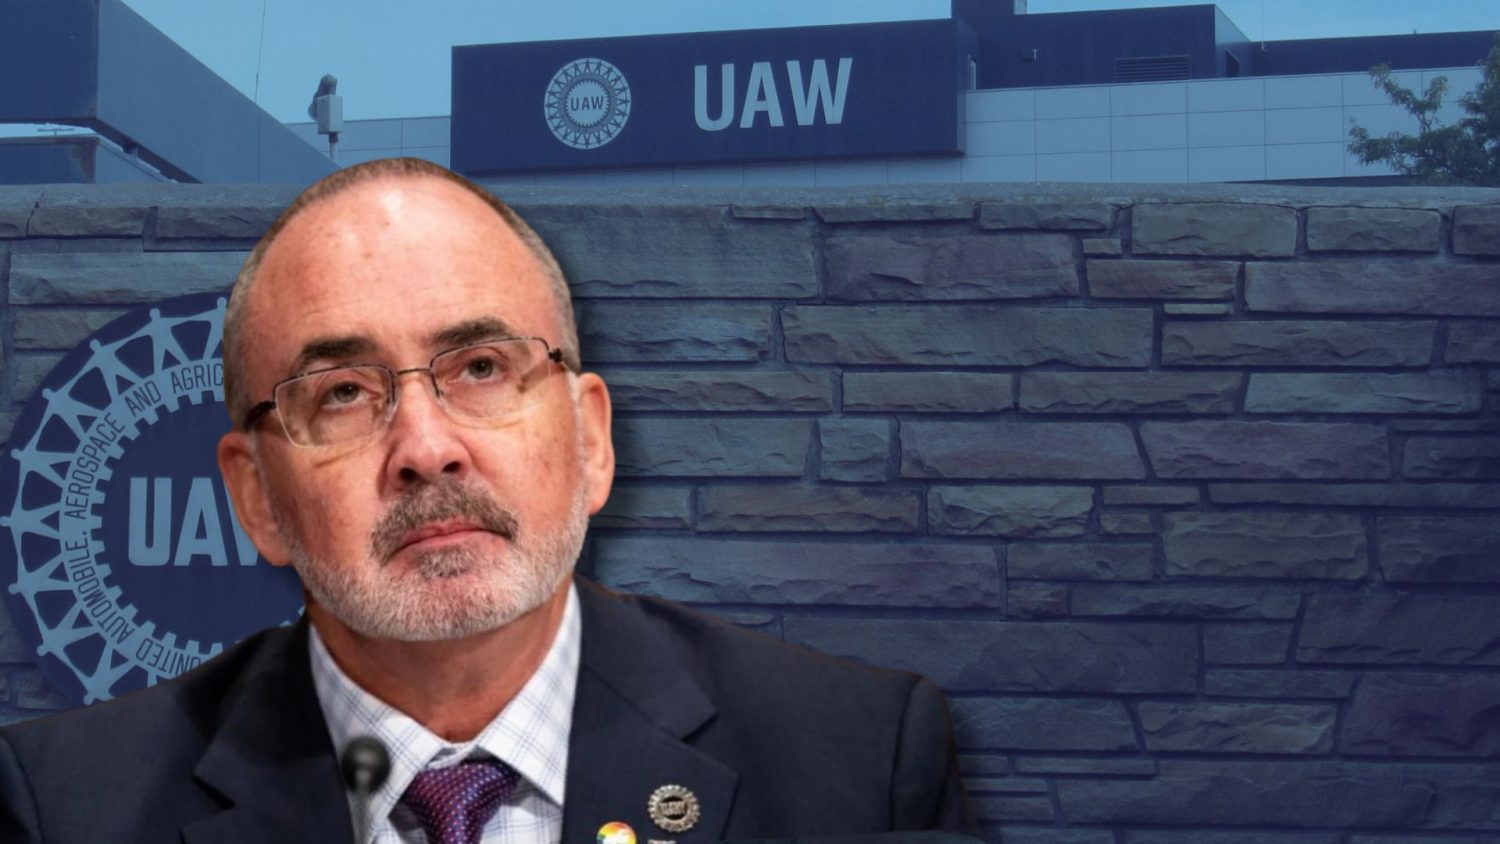 UAW President is under investigation by a federal court-appointed watchdog tasked with monitoring the union and eliminating corruption.